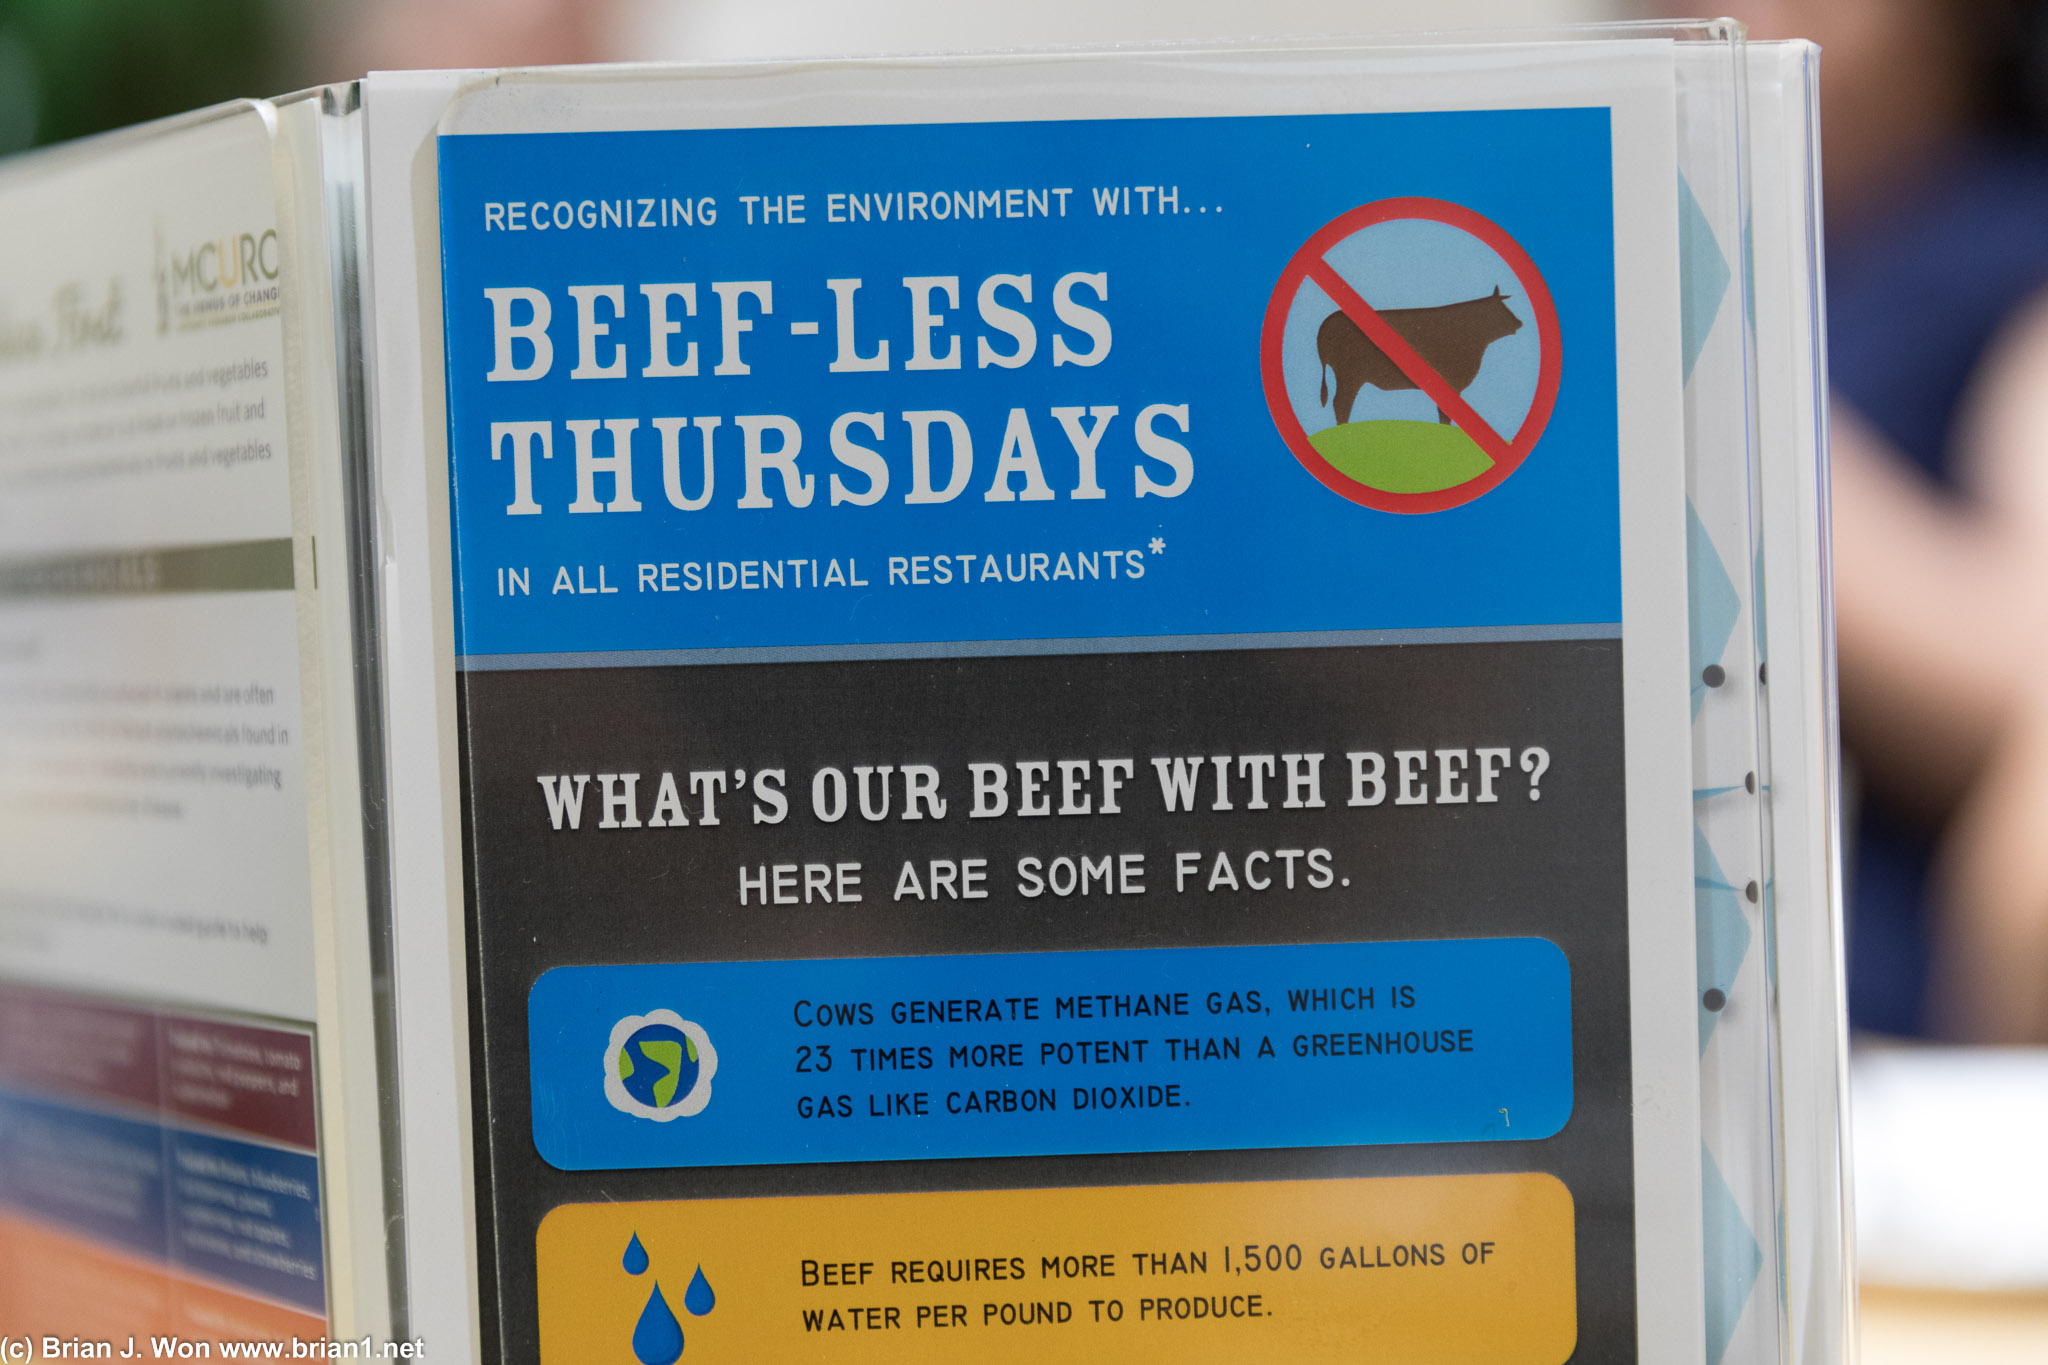 Oops, didn't realize it was beef-less today!